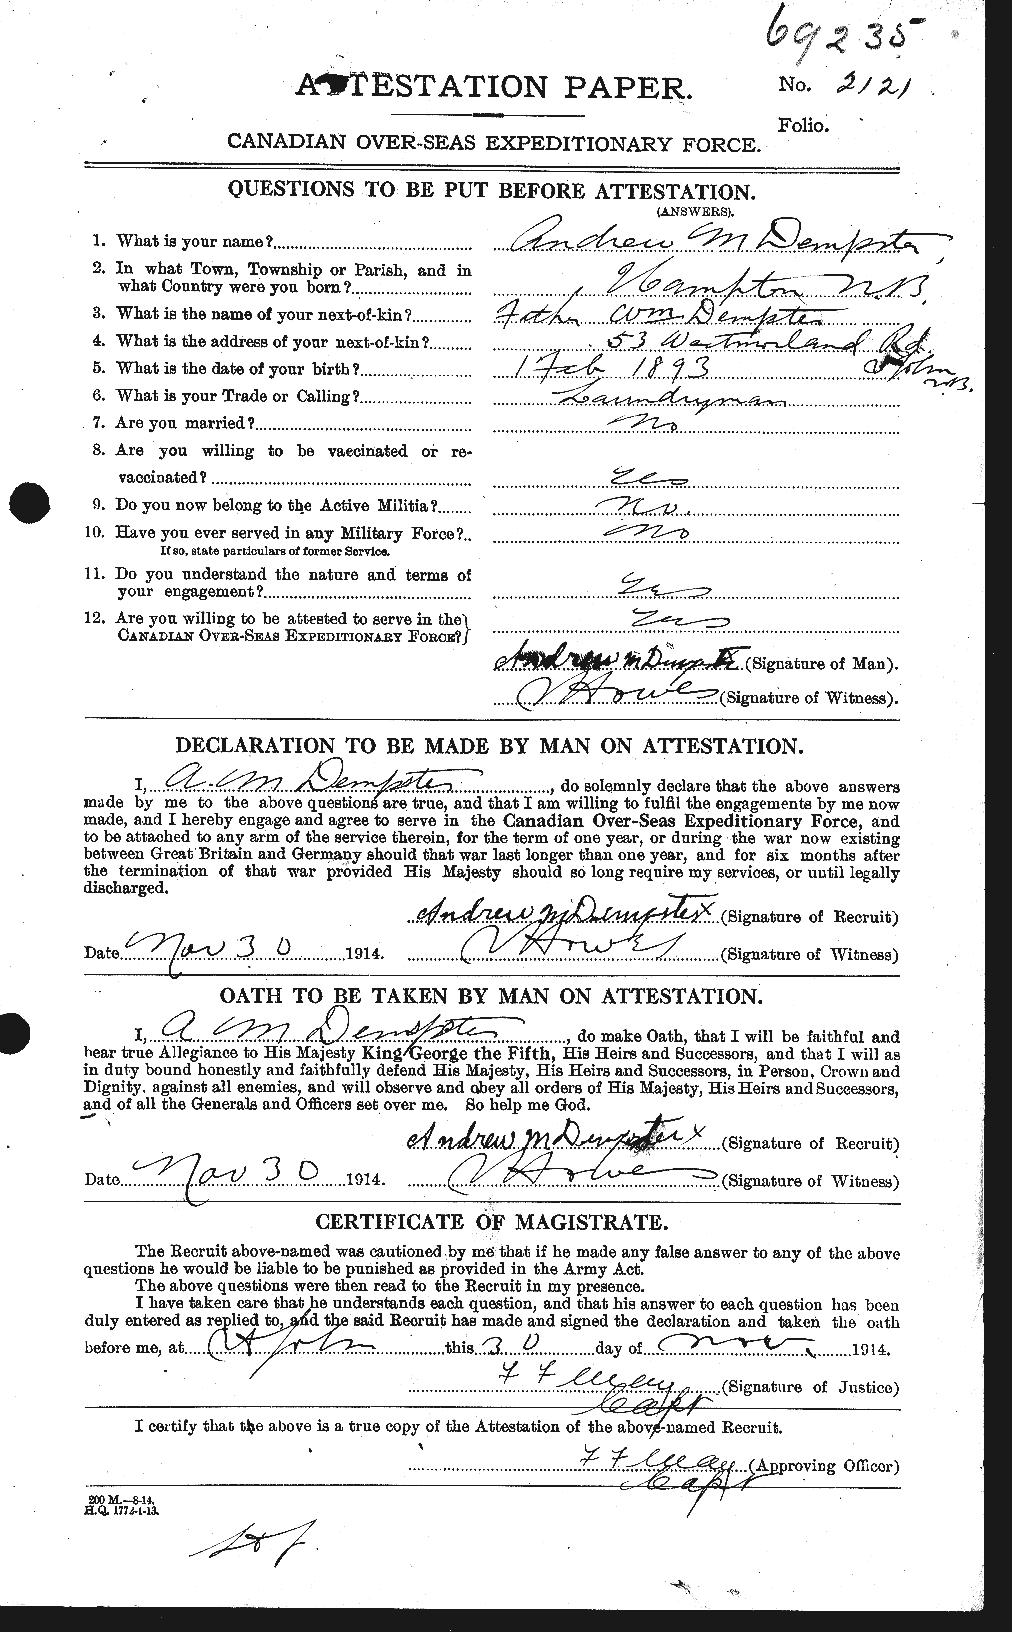 Personnel Records of the First World War - CEF 286938a